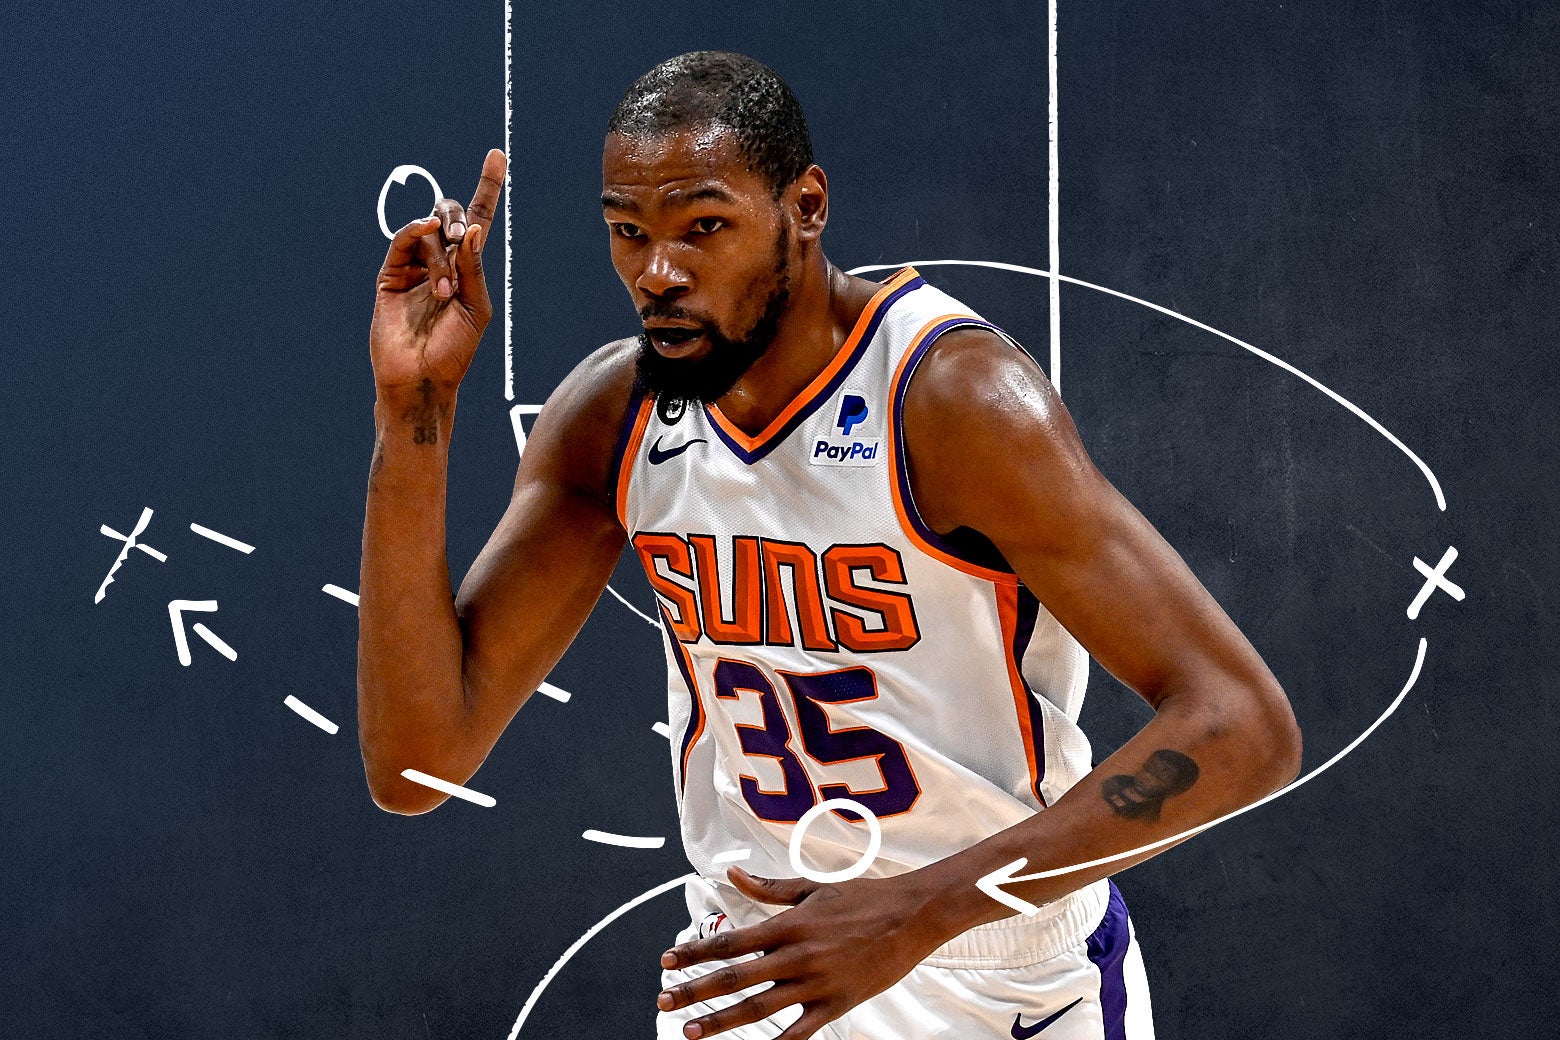 KD in his Suns uniform with his right pointer finger in the air, his left arm down in front of him, with the X's and O's of a play illustrated around him.